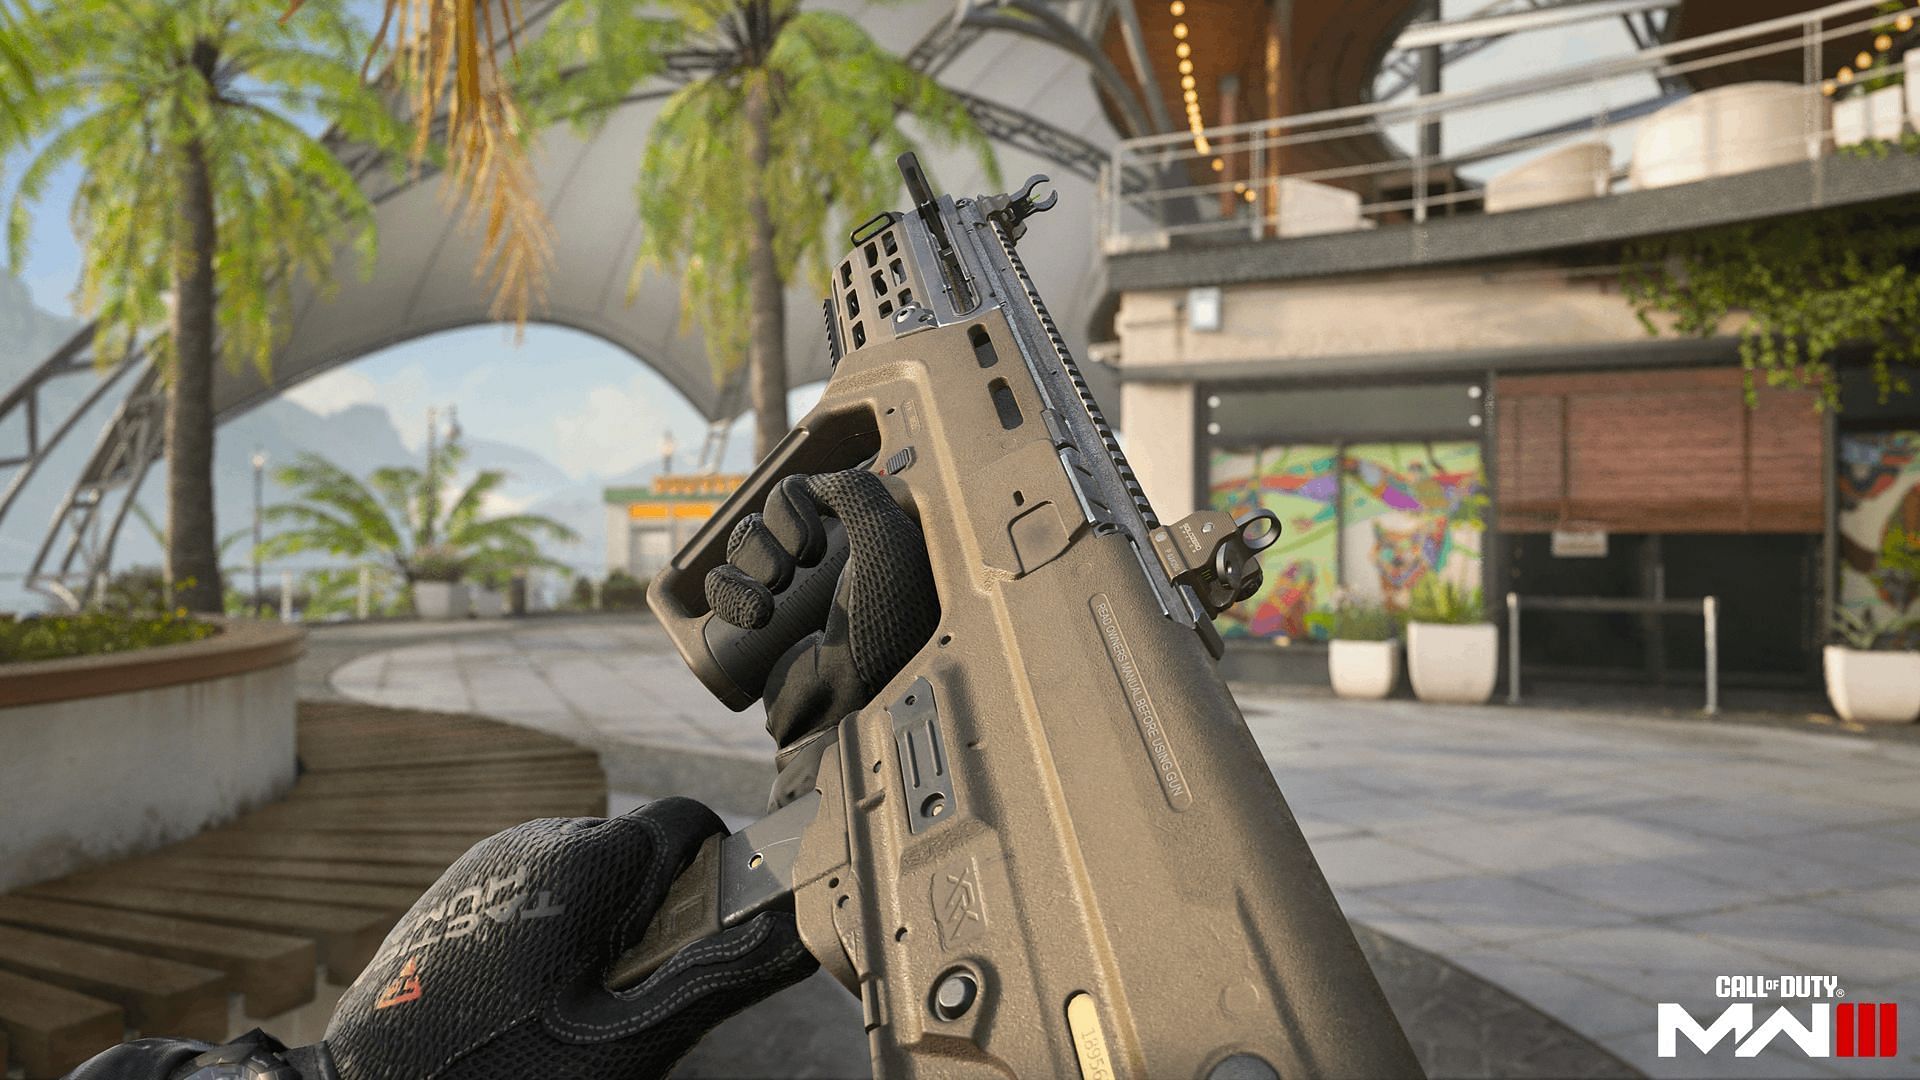 RAM-9 SMG in Warzone (Image via Activision)